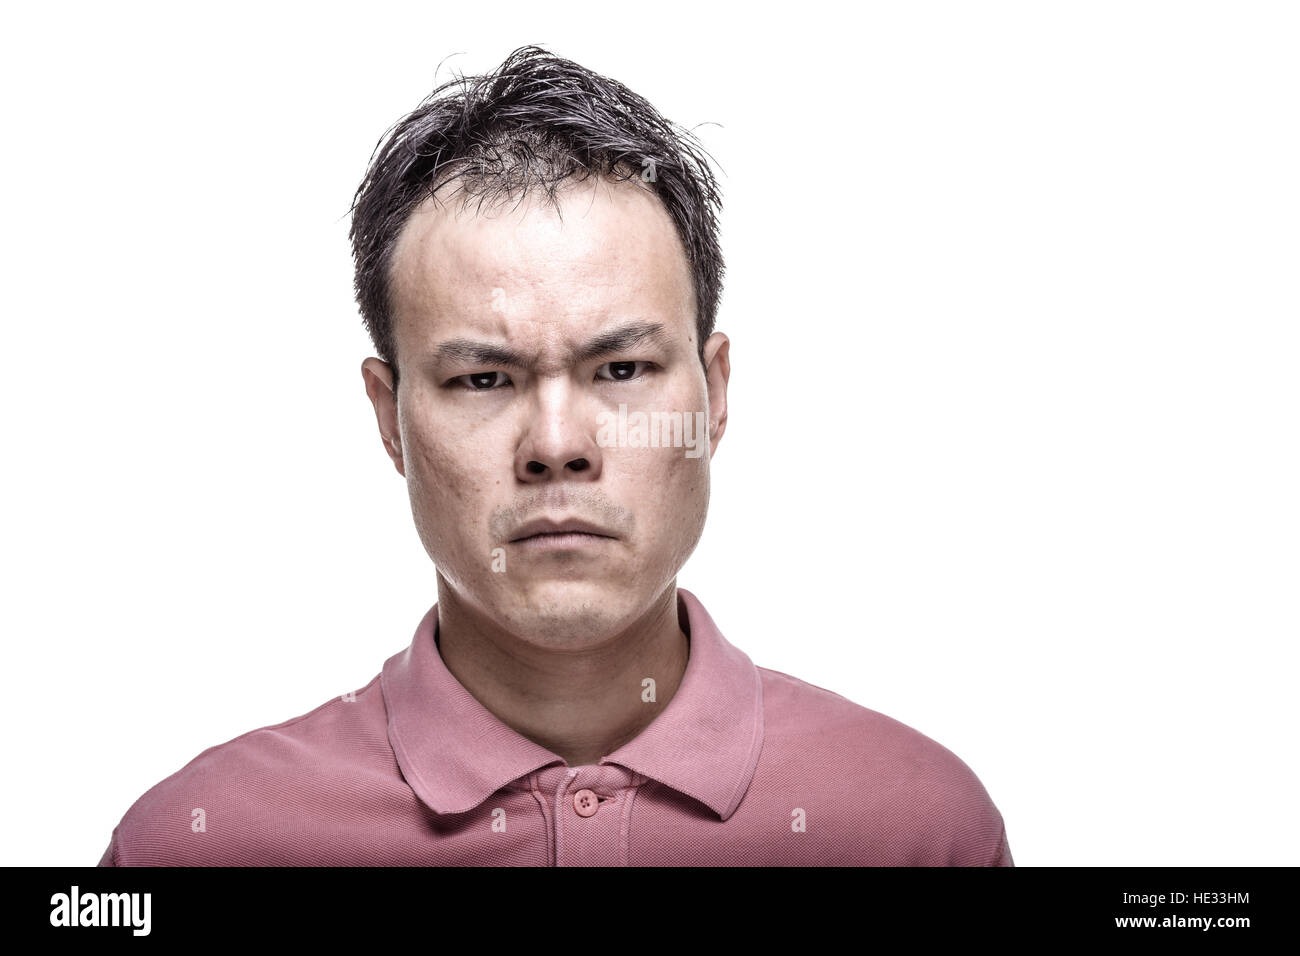 Facial expression : angry man serious face Stock Photo